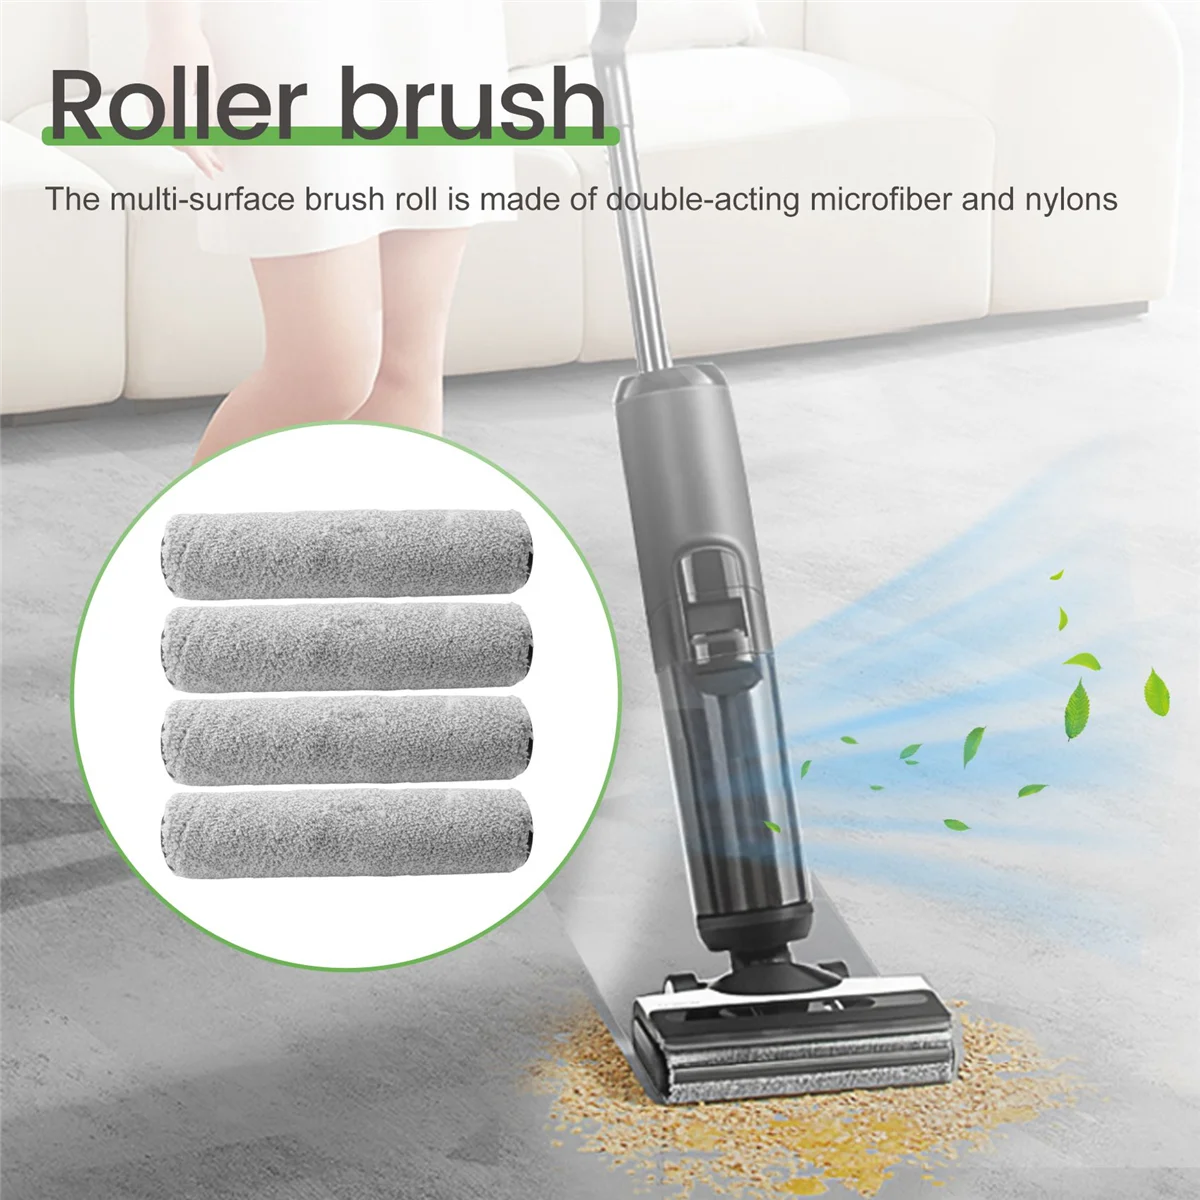 

Replacement Brush Rolls and Vacuum Filters for Tineco IFloor 3 and Floor One S3 Cordless Wet Dry Vacuum Cleaner Parts